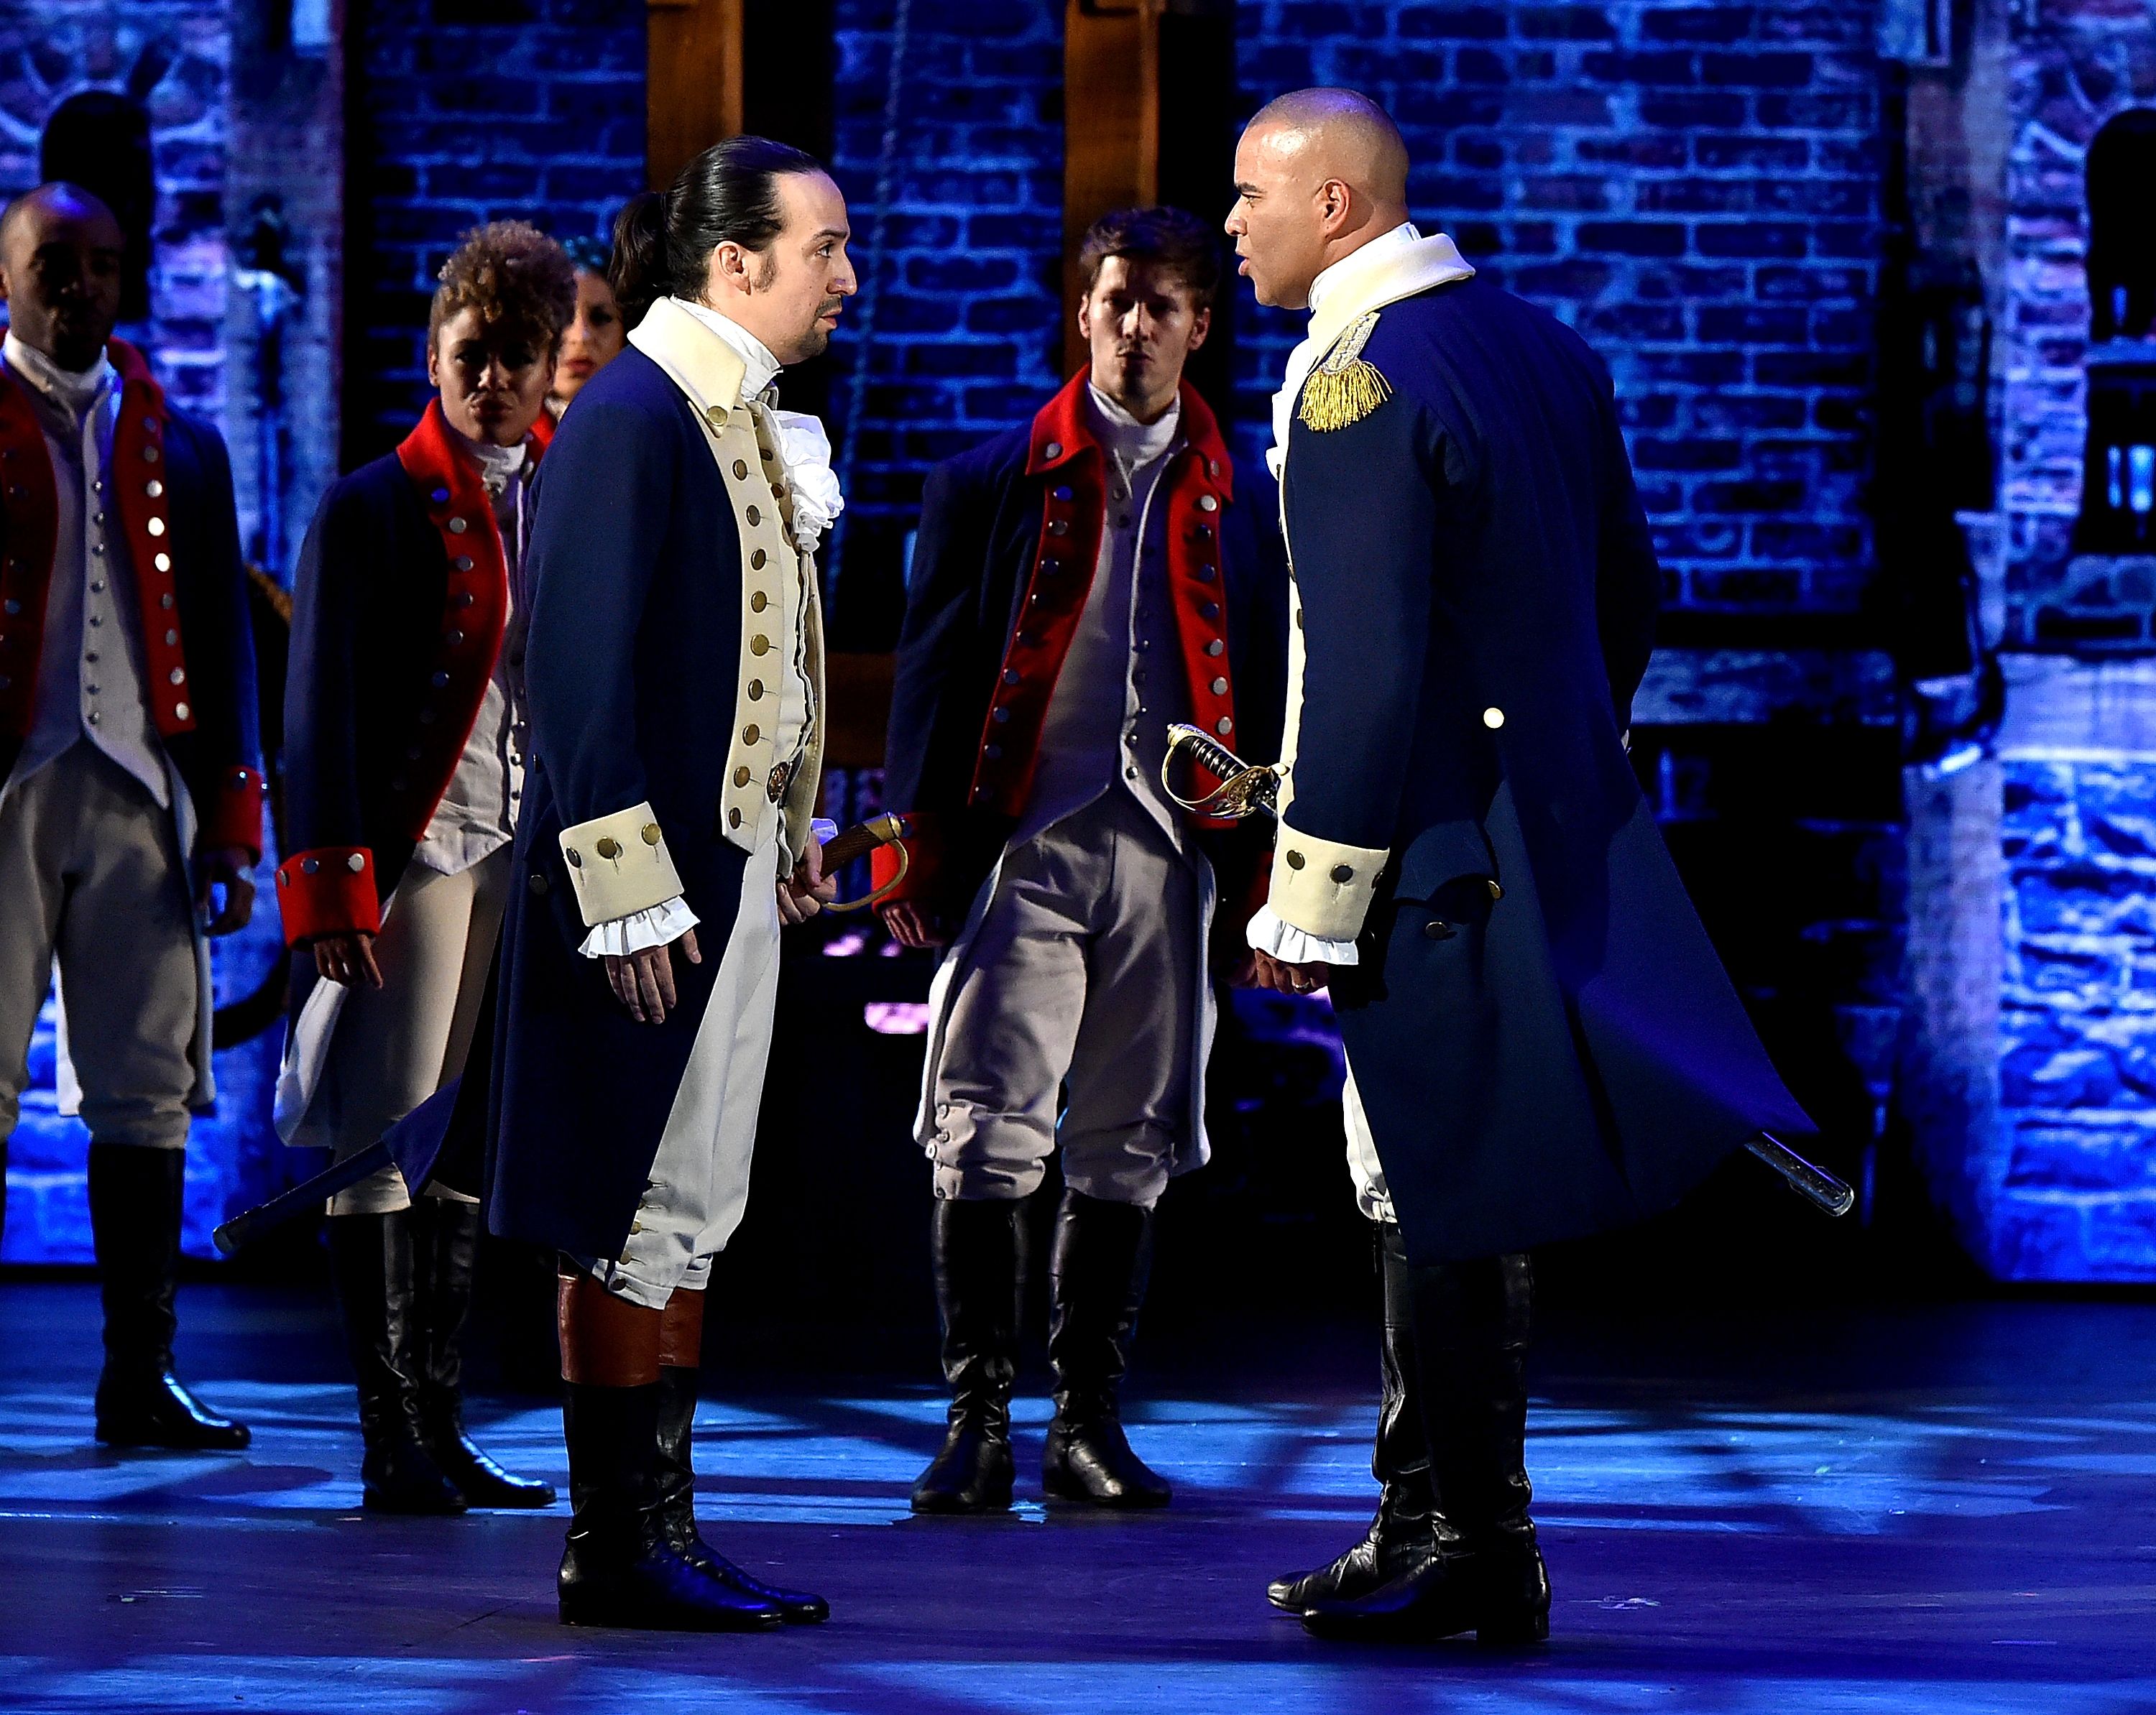 Lin-Manuel Miranda and Christopher Jackson of "Hamilton" onstage during the 70th Annual Tony Awards at The Beacon Theatre on June 12, 2016 in New York City. | Source: Shutterstock